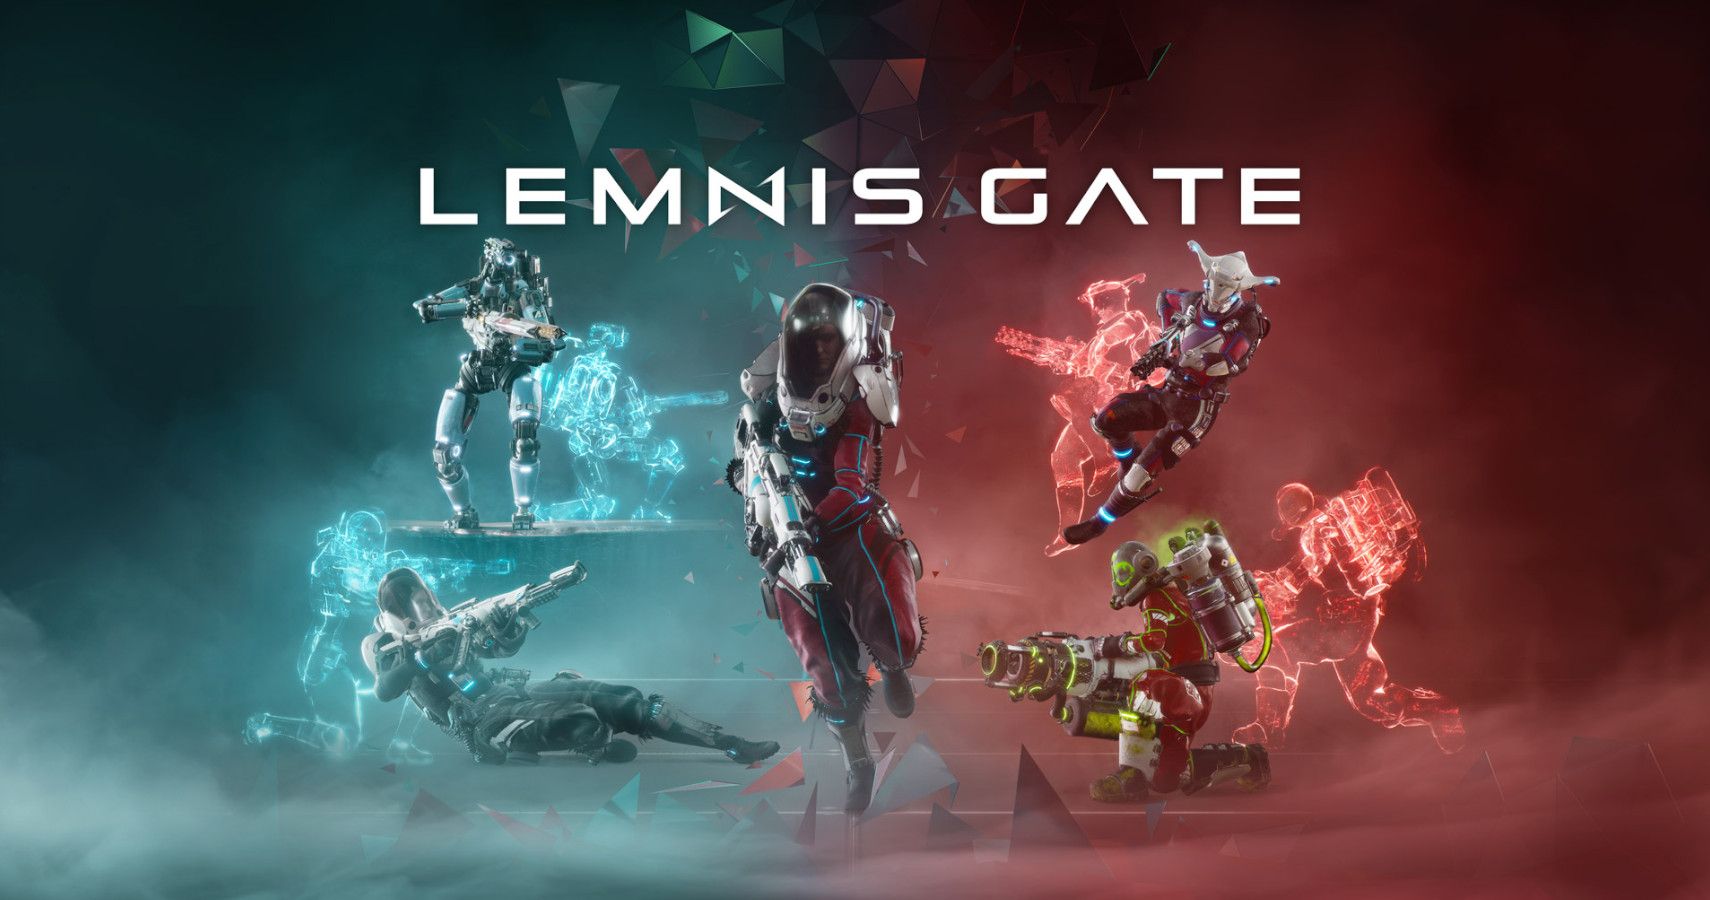 lemnis gate promo art with 5 characters all in a temporal frenzy